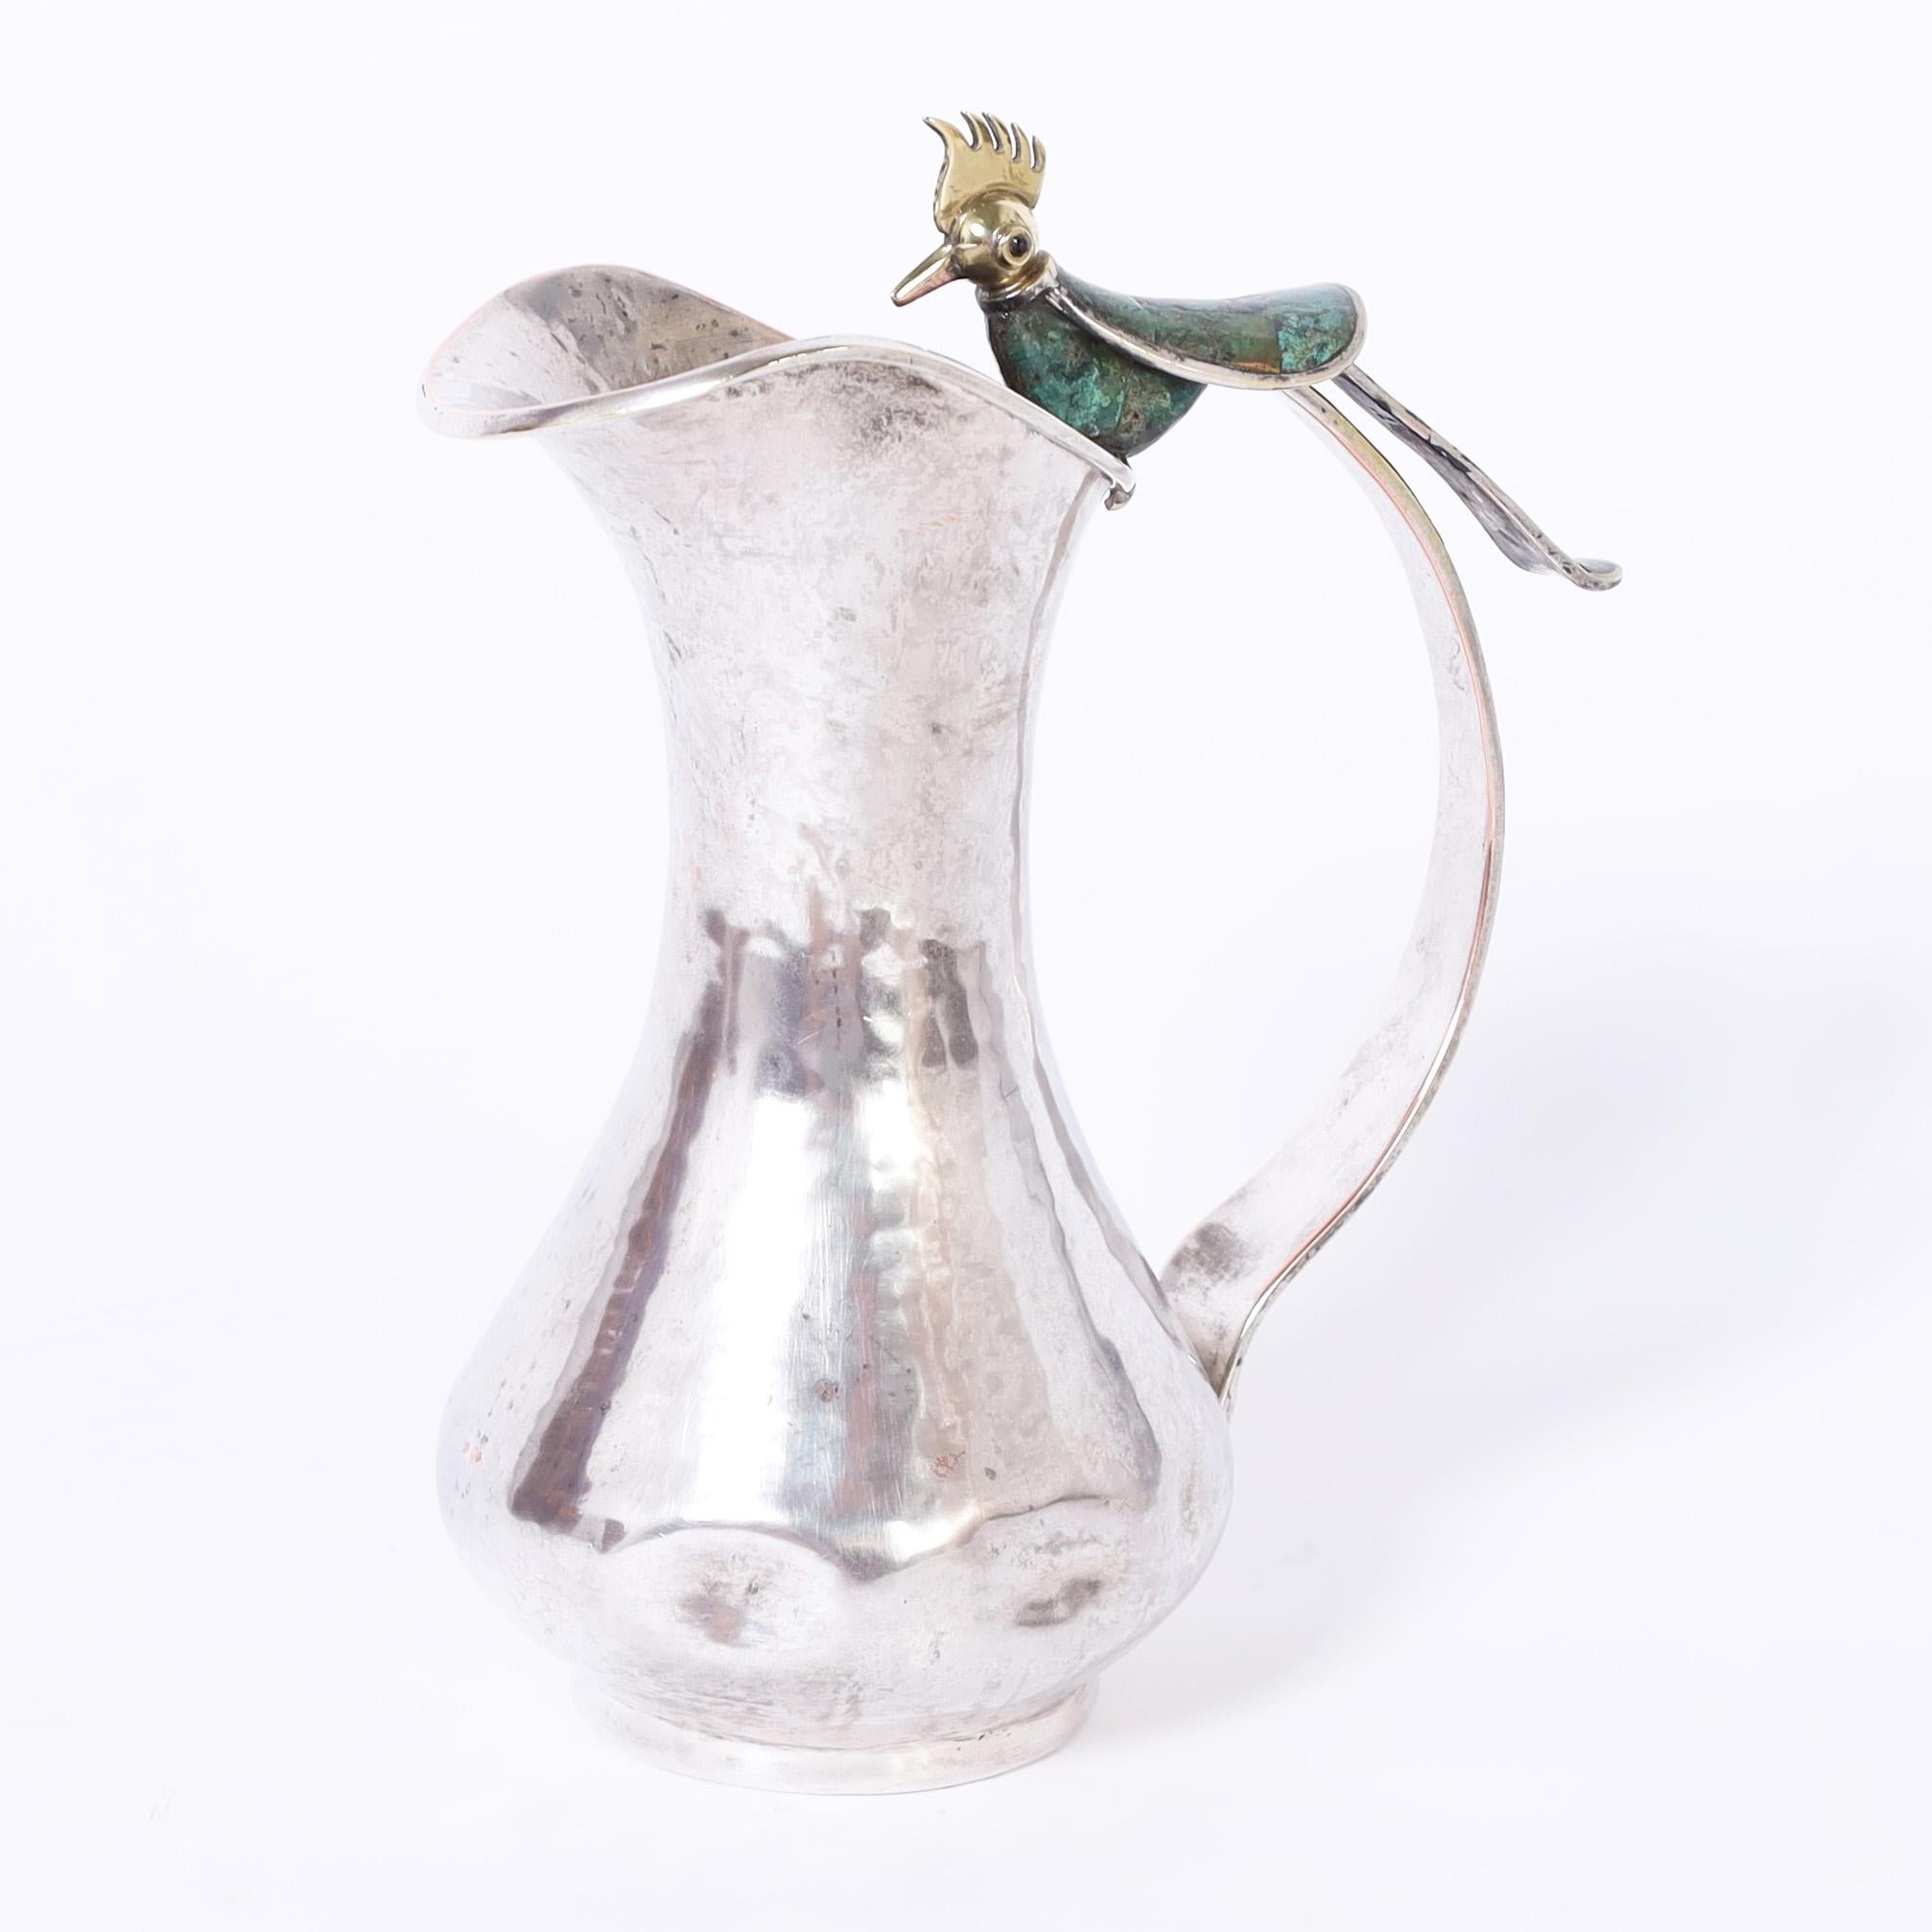 Hammered Mid Century Silver Plate Pitcher with Bird by Los Castillo